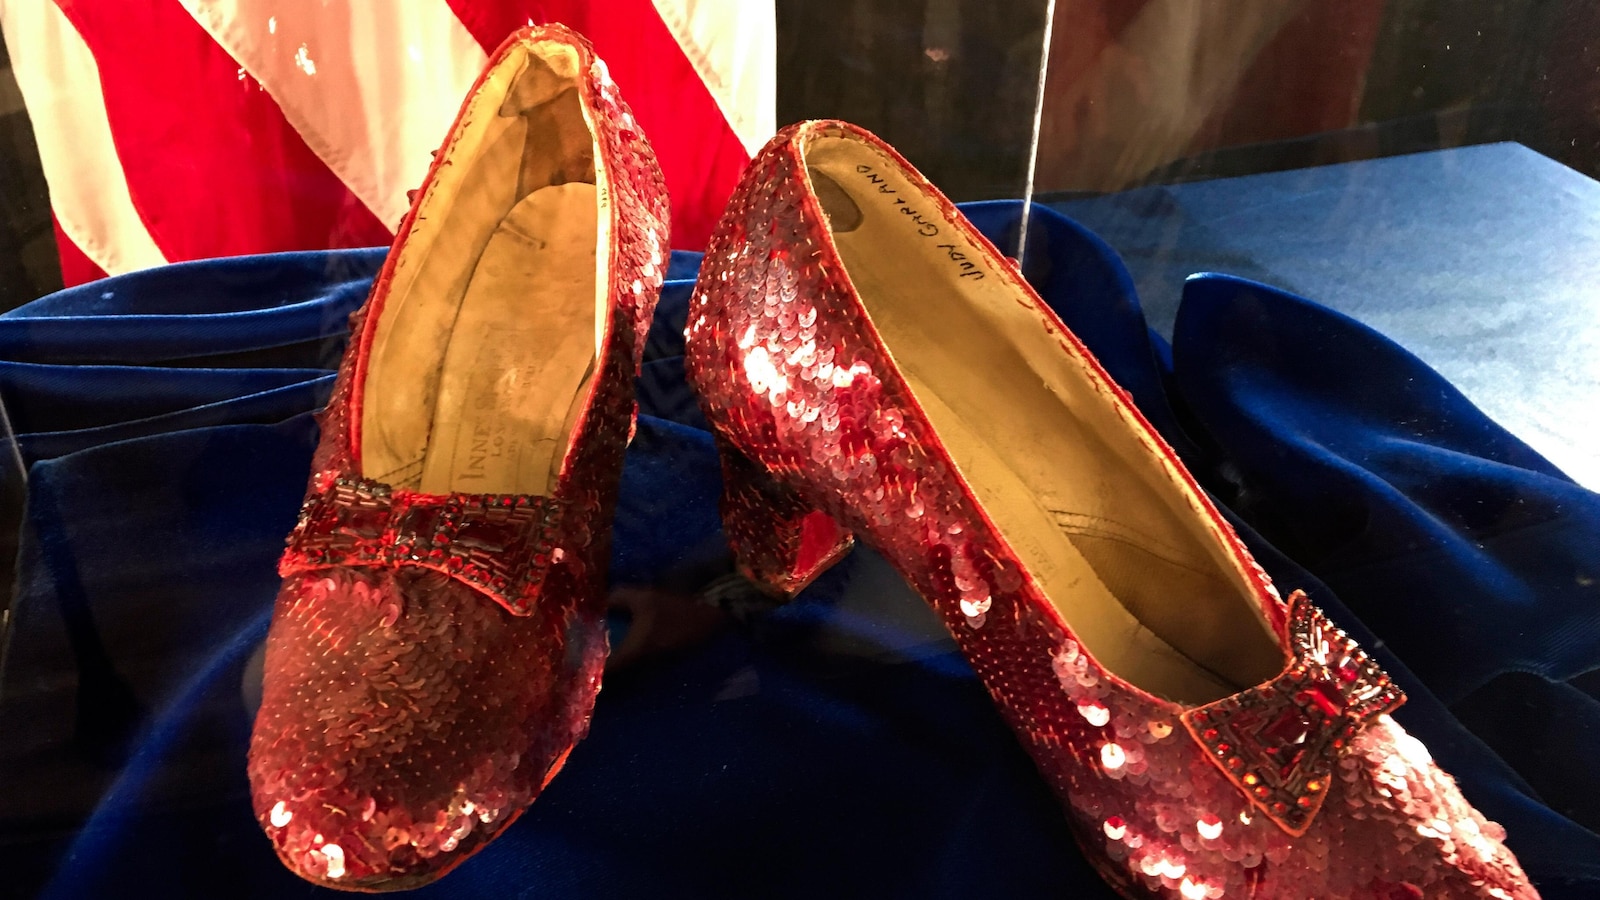 Probable exemption from imprisonment for dying thief who pilfered ruby slippers from Minnesota museum